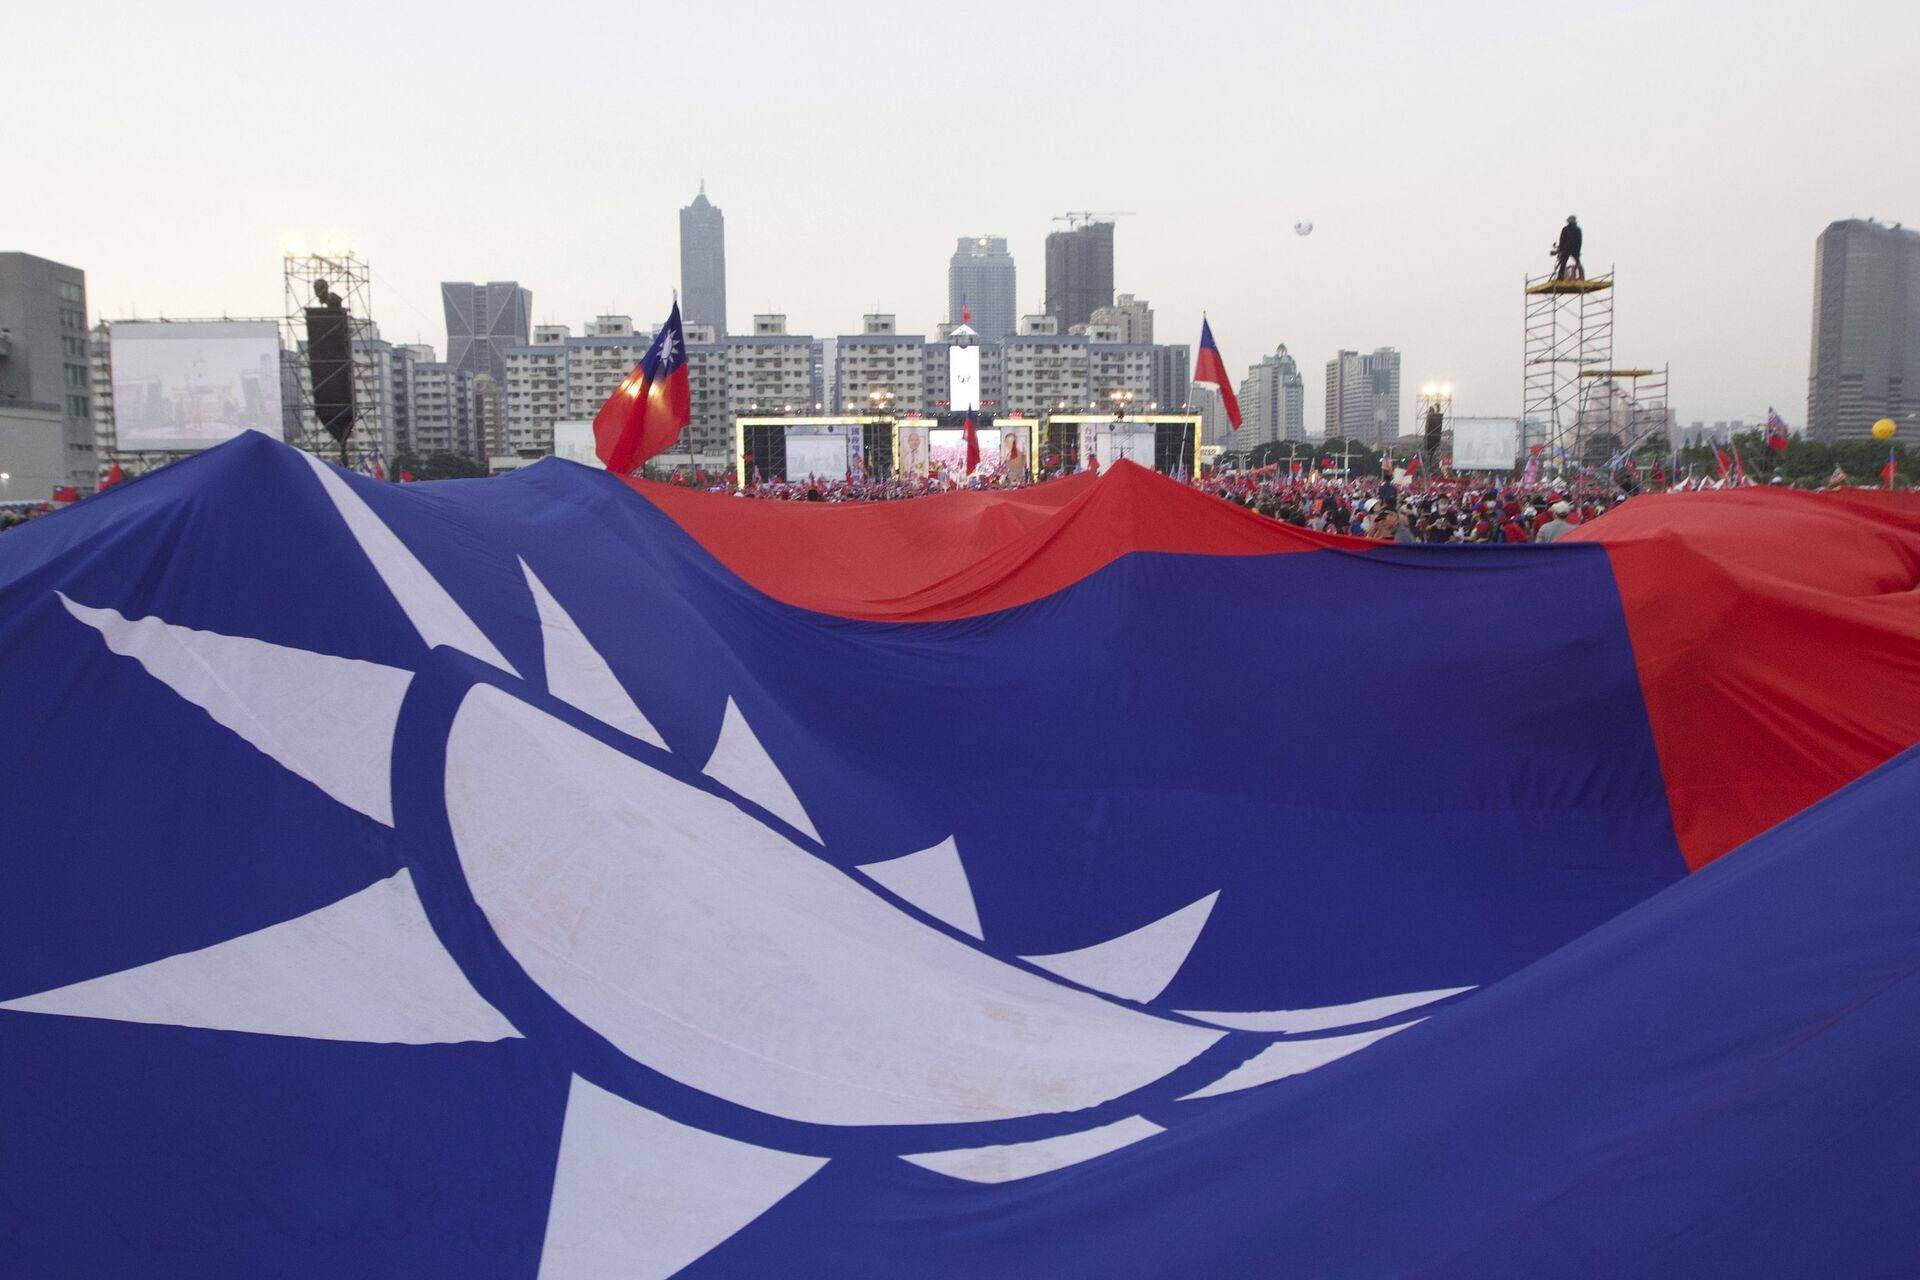 Supporters of Taiwan's 2020 presidential election candidate for the KMT, or Nationalist Party, Han Kuo-yu pass along a giant Taiwanese flag for the start of a campaign rally in southern Taiwan's Kaohsiung city on Friday, Jan 10, 2020 - Sputnik International, 1920, 10.11.2021